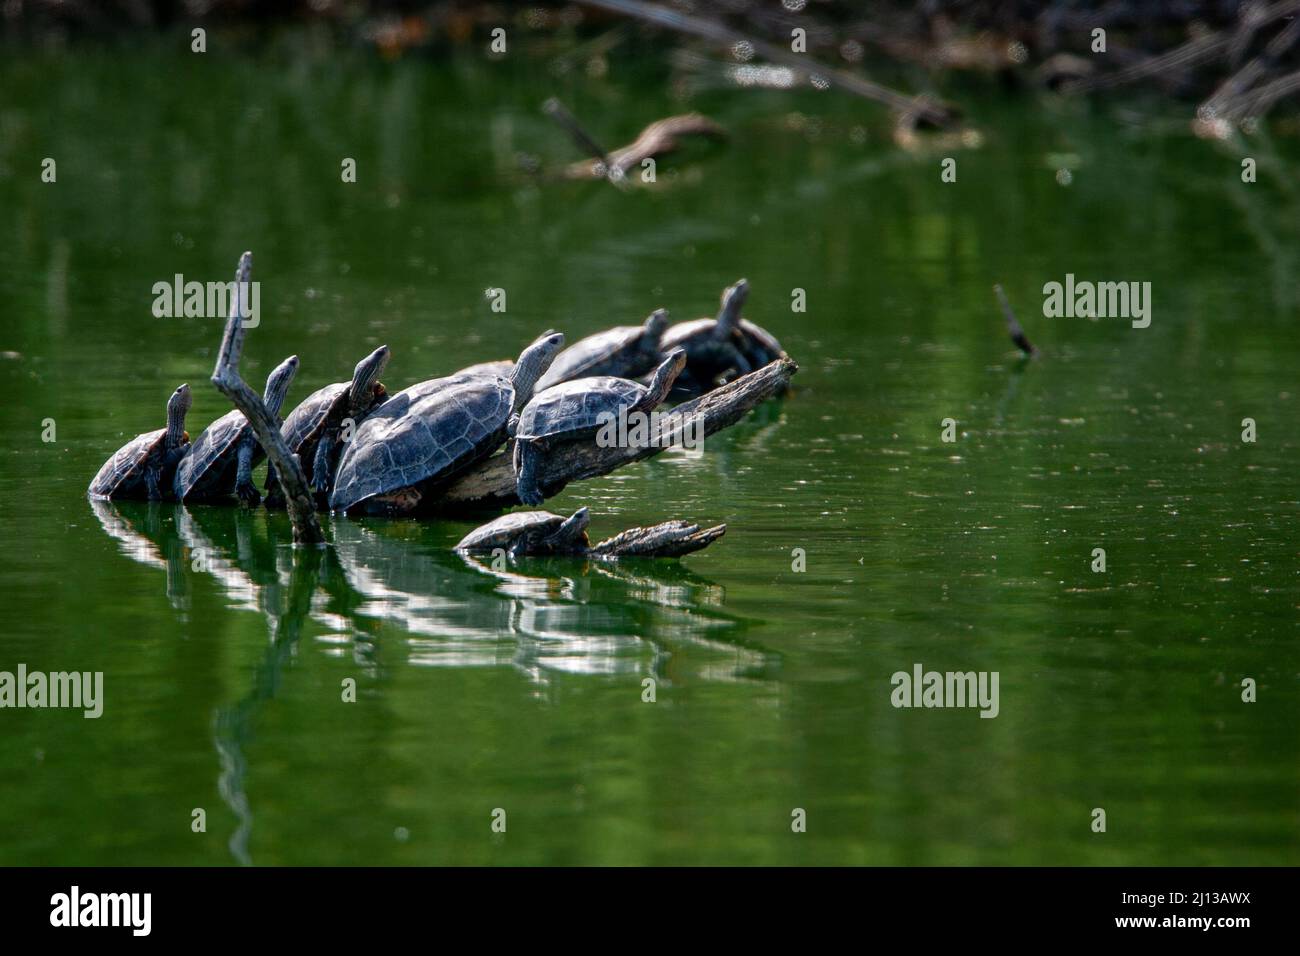 Caspian turtle in water. The Caspian turtle (Mauremys caspica), or striped-neck terrapin, is a medium-sized semi-aquatic turtle, which is found from f Stock Photo